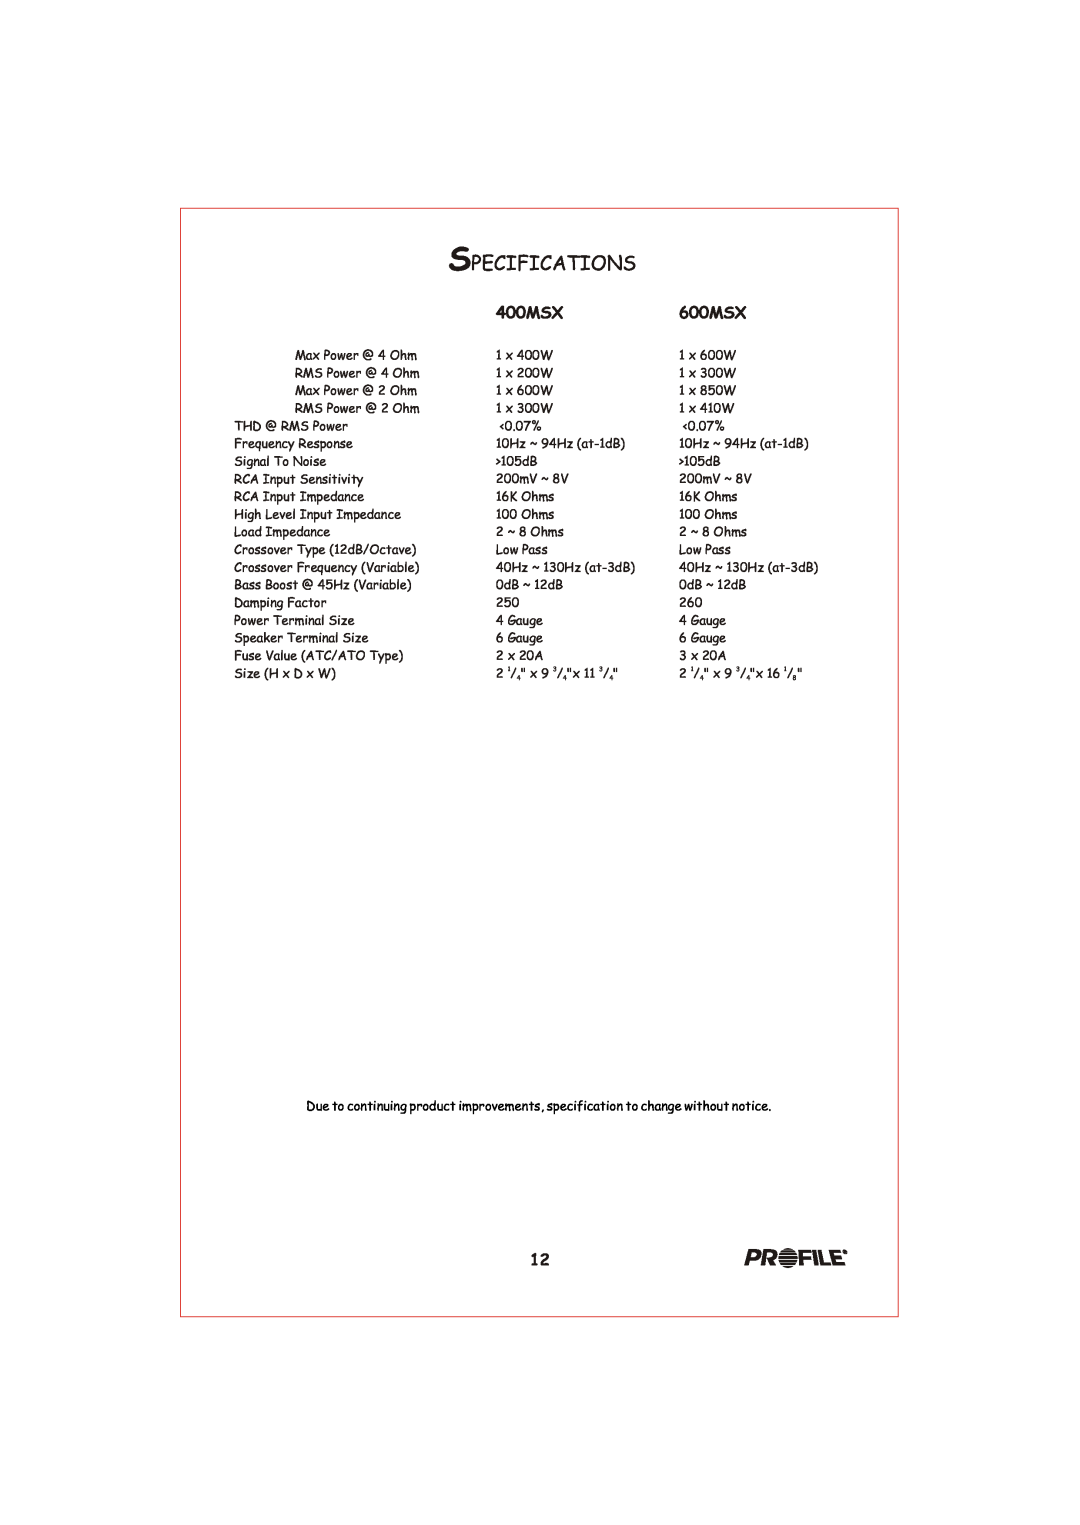 Profile 400MSX installation instructions Specifications, 600MSX 